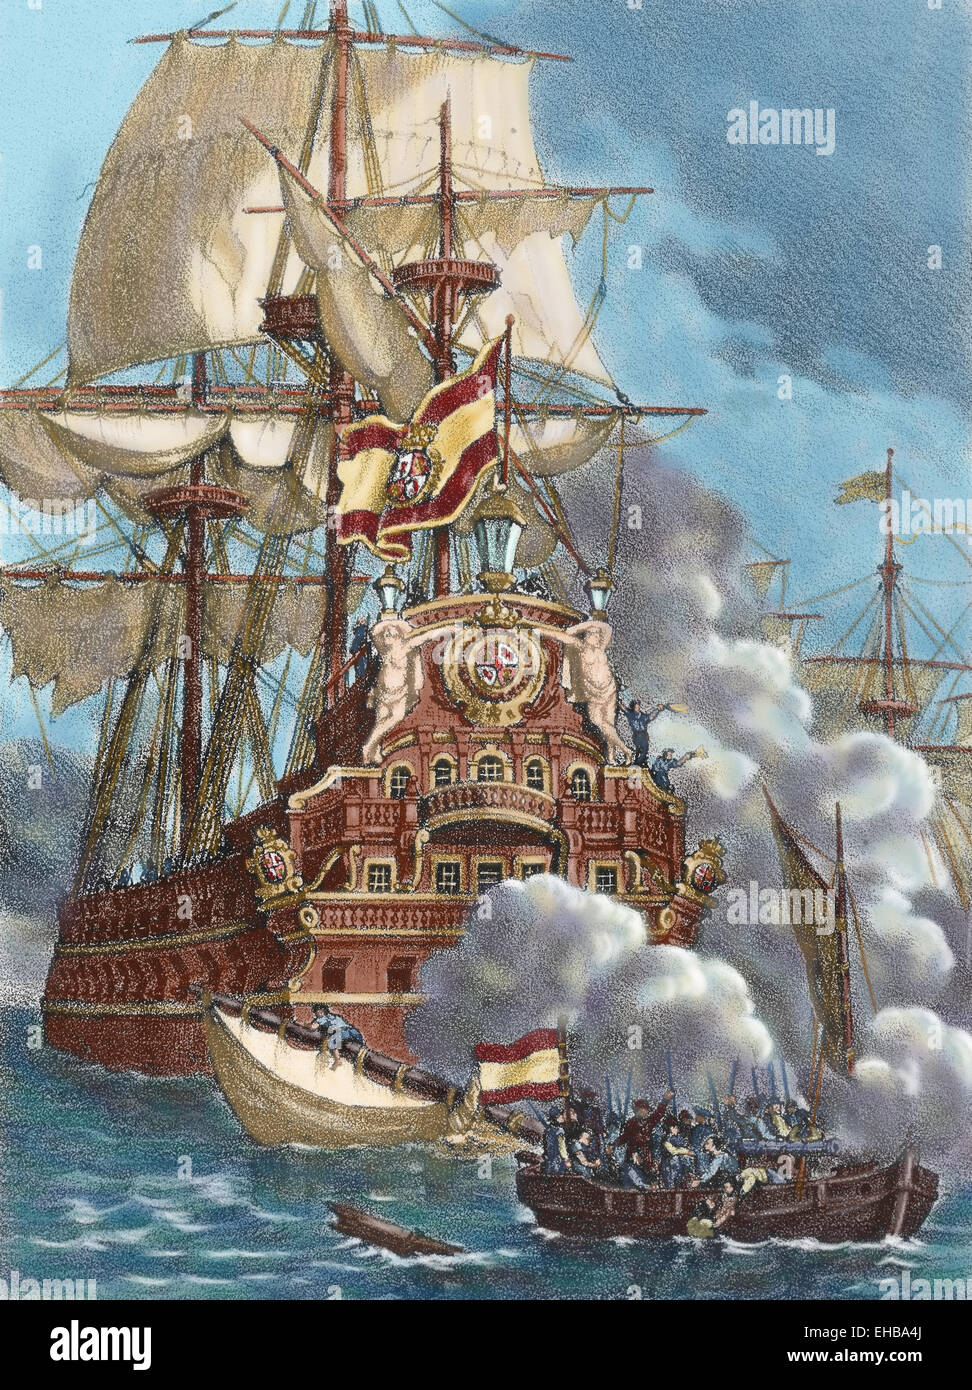 The Brethren or Brethren of the Coast attacking three Spanish galleons. They were a coalition of pirates and privateers known as buccaneers and active in the17th and 18th centuries in the Atlantic Ocean, Caribbean Sea and Gulf of Mexico. Engraving in 'Historia de España', 19th century. Colored. Stock Photo